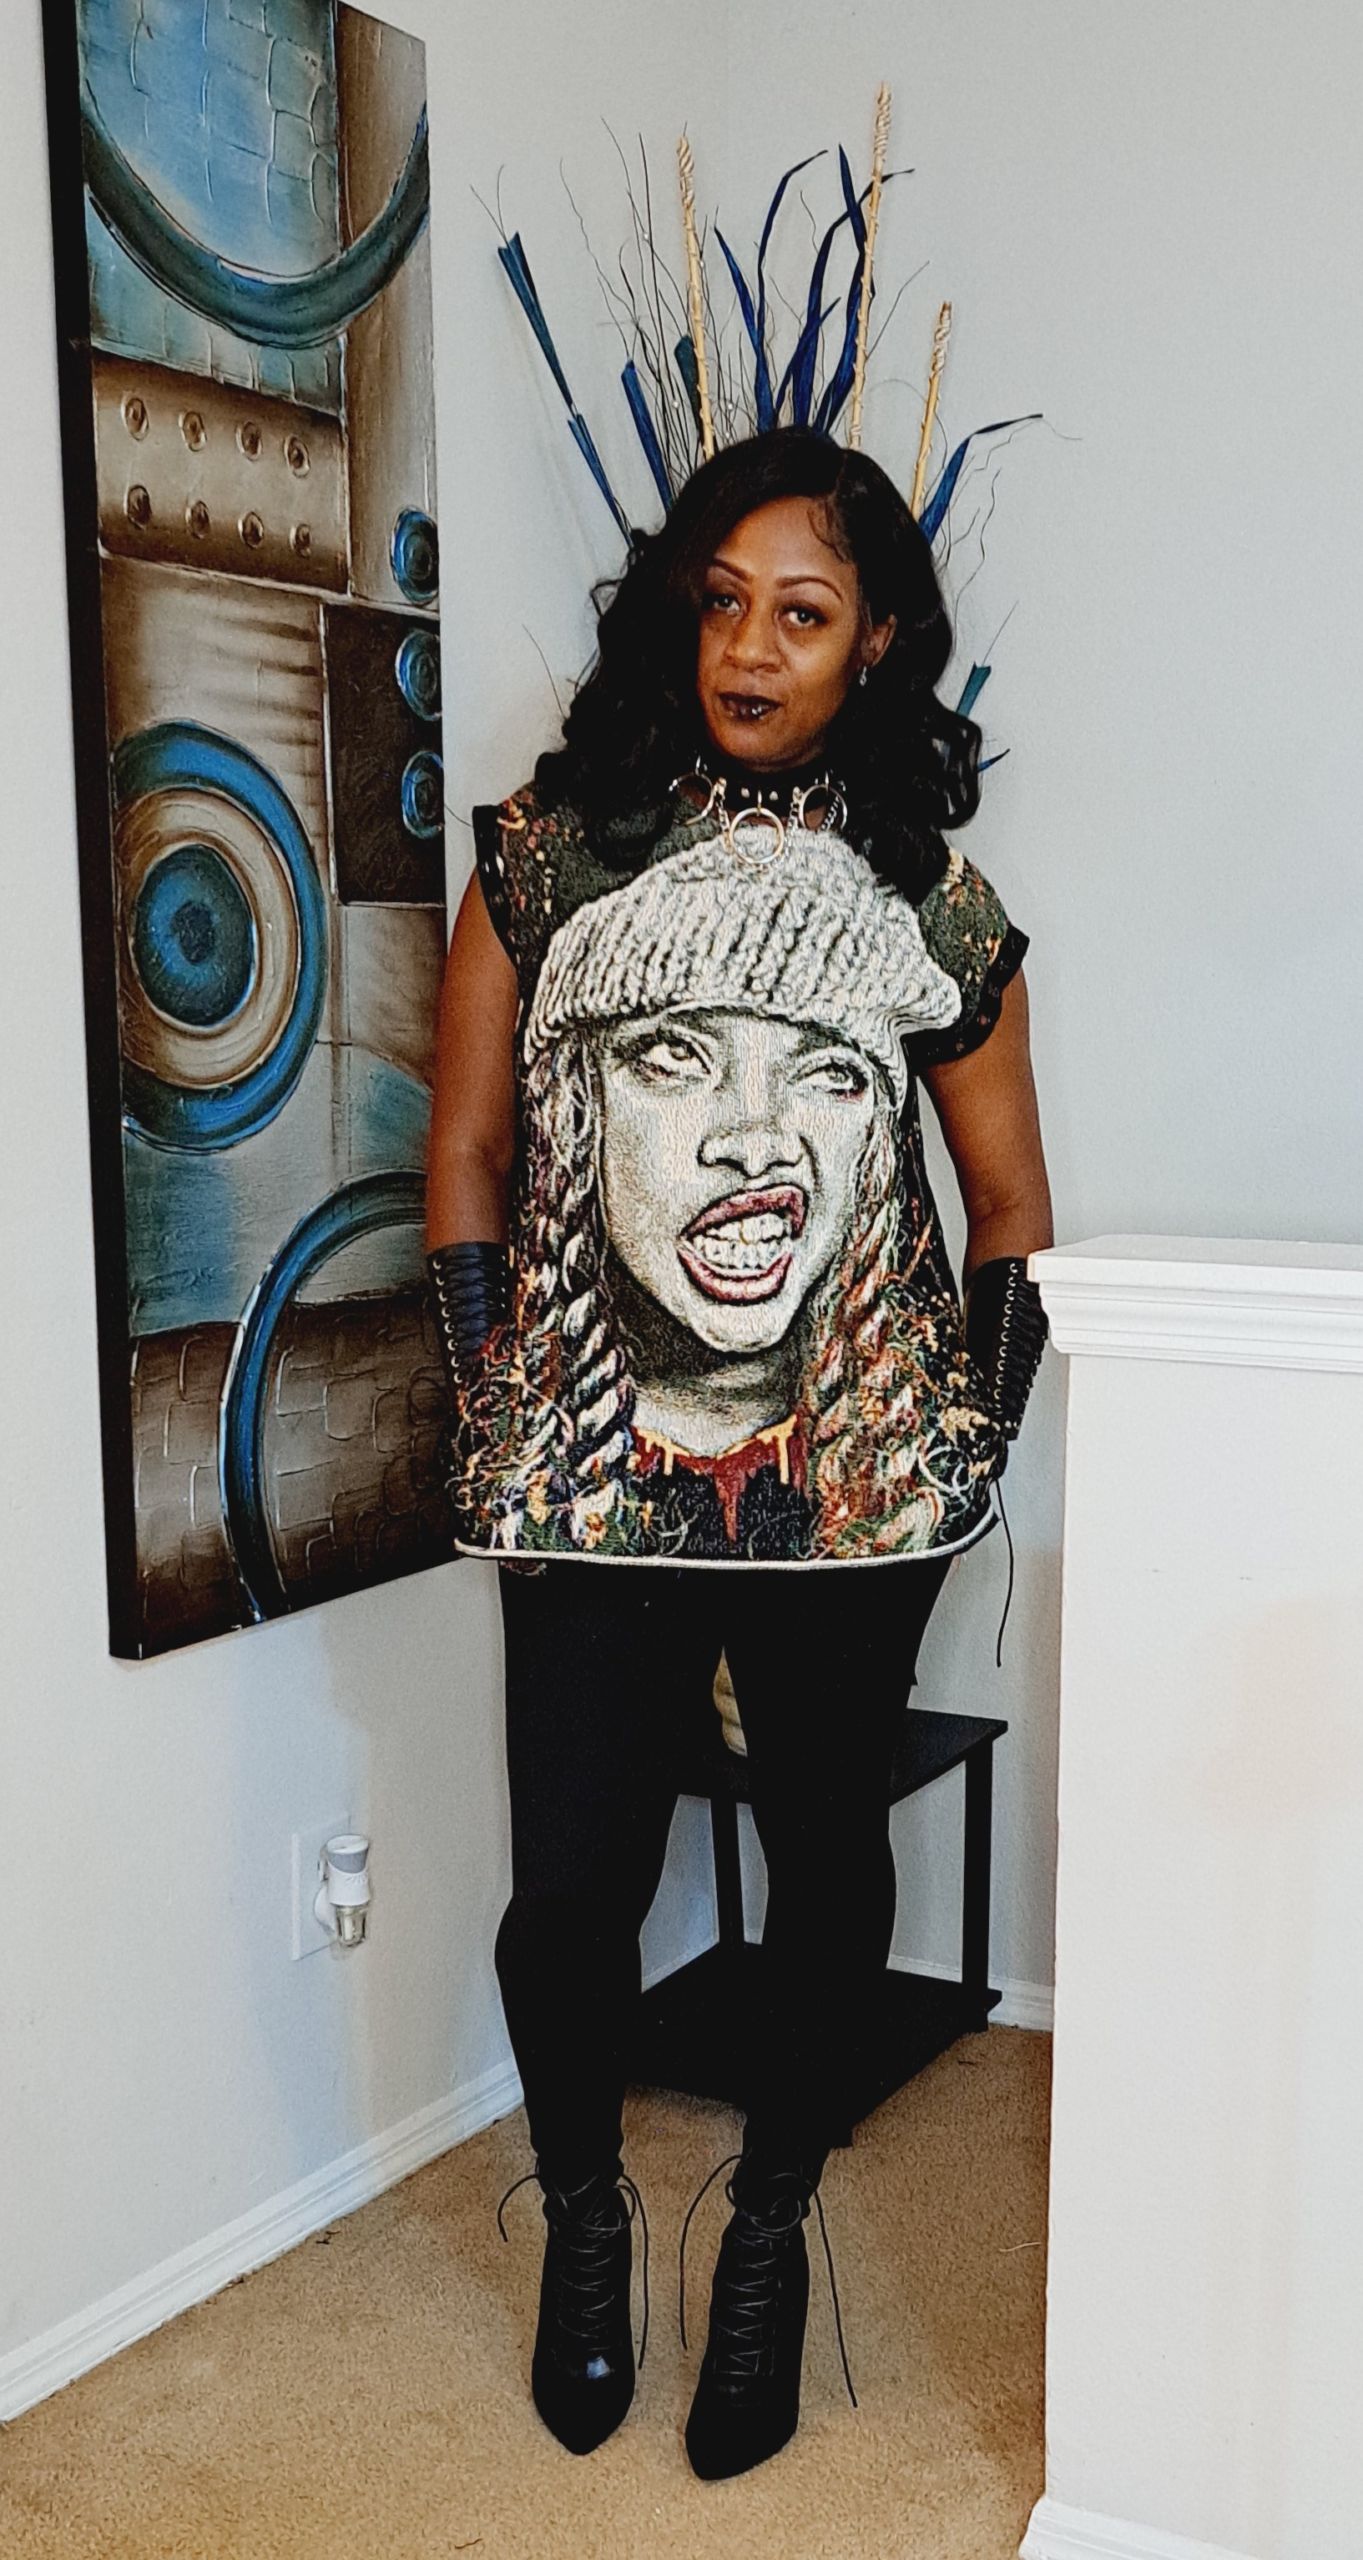 black woman wearing a t-shirt with artwork of a black woman on it